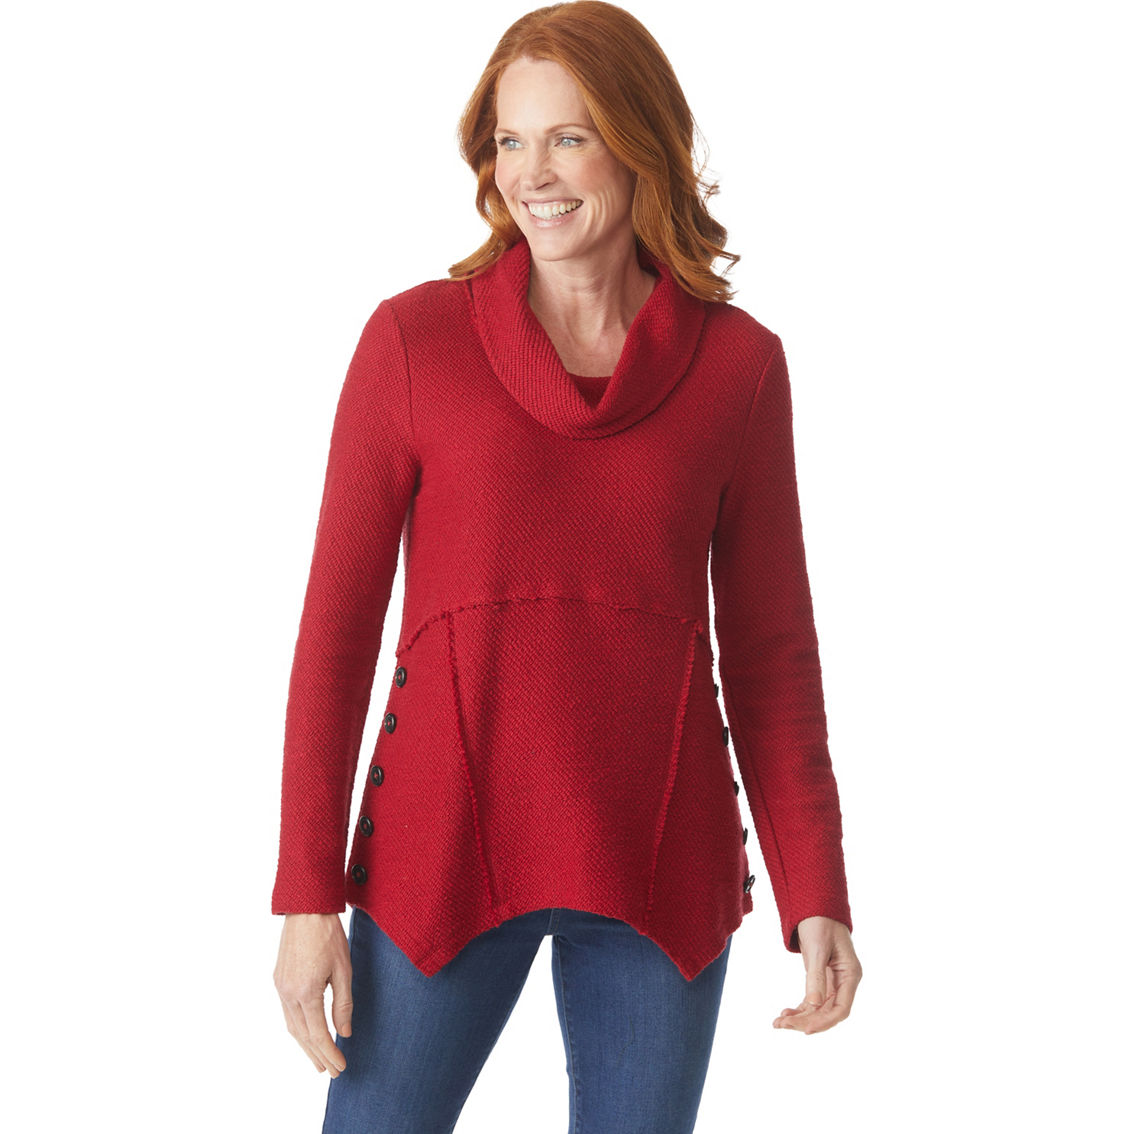 Passports Textured 2 Side Buttons Cowl Neck Top | Tops | Clothing ...